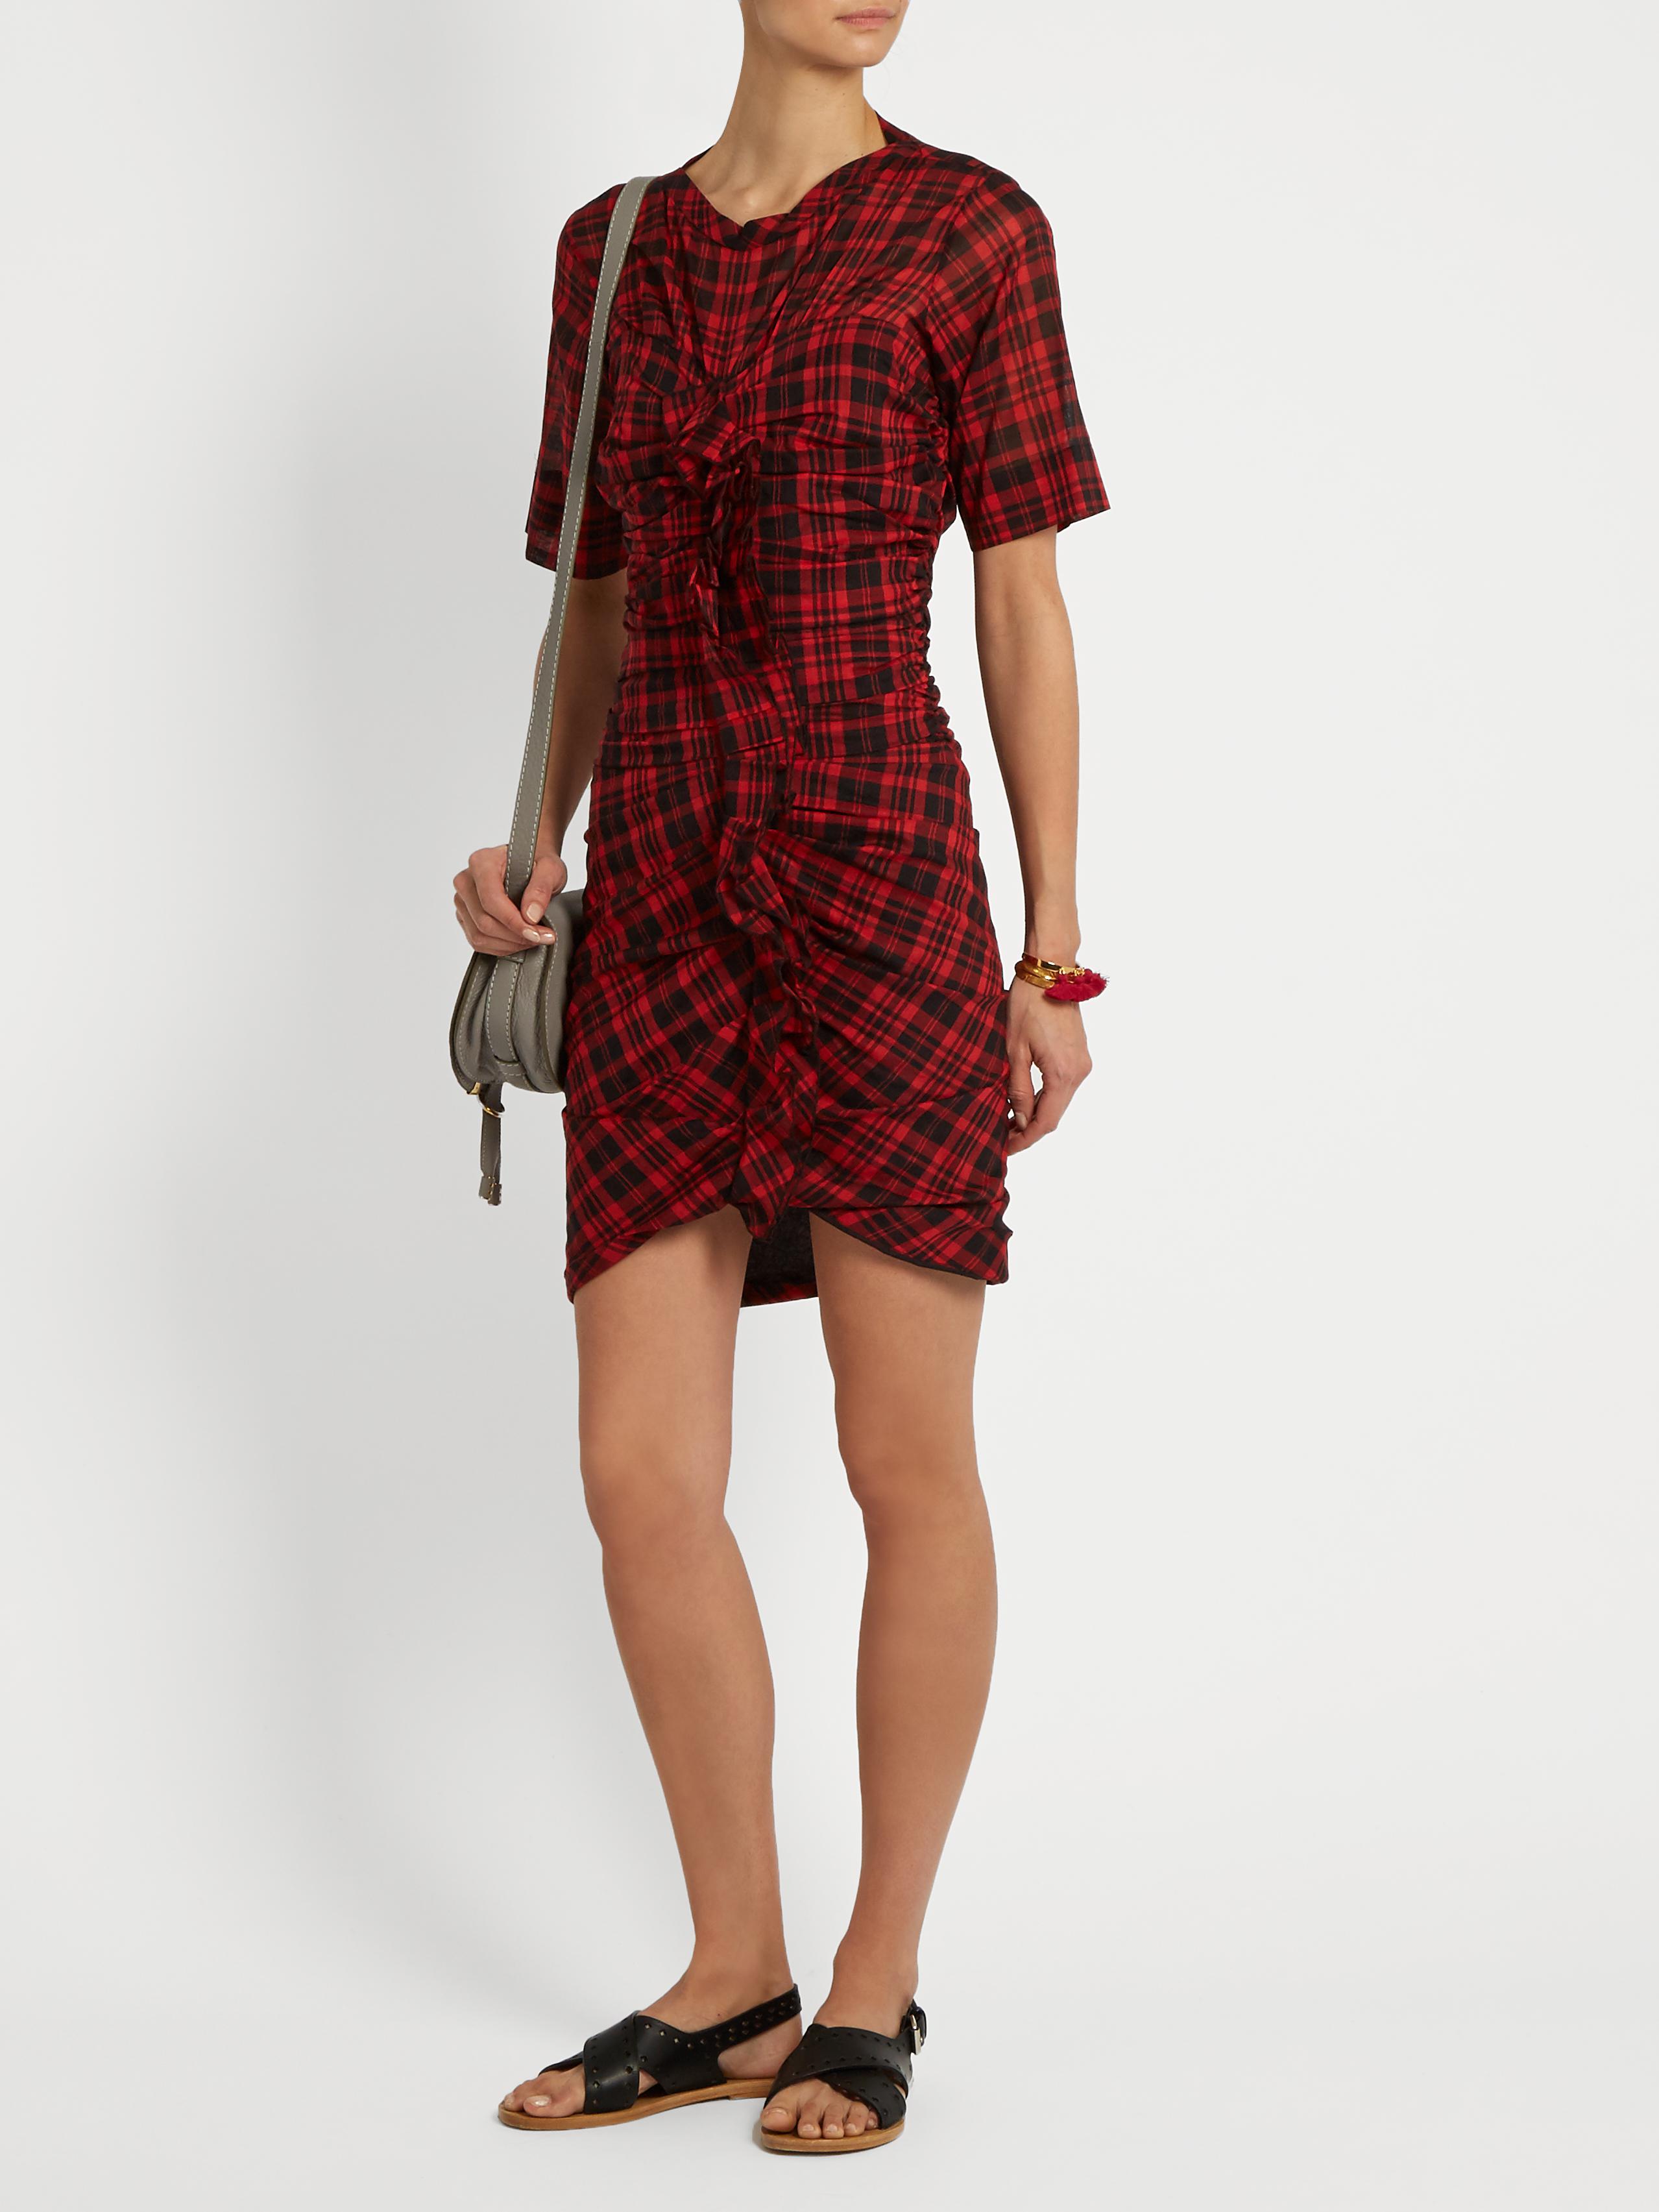 Étoile Marant Wallace Checked Cotton-blend Dress in Red | Lyst